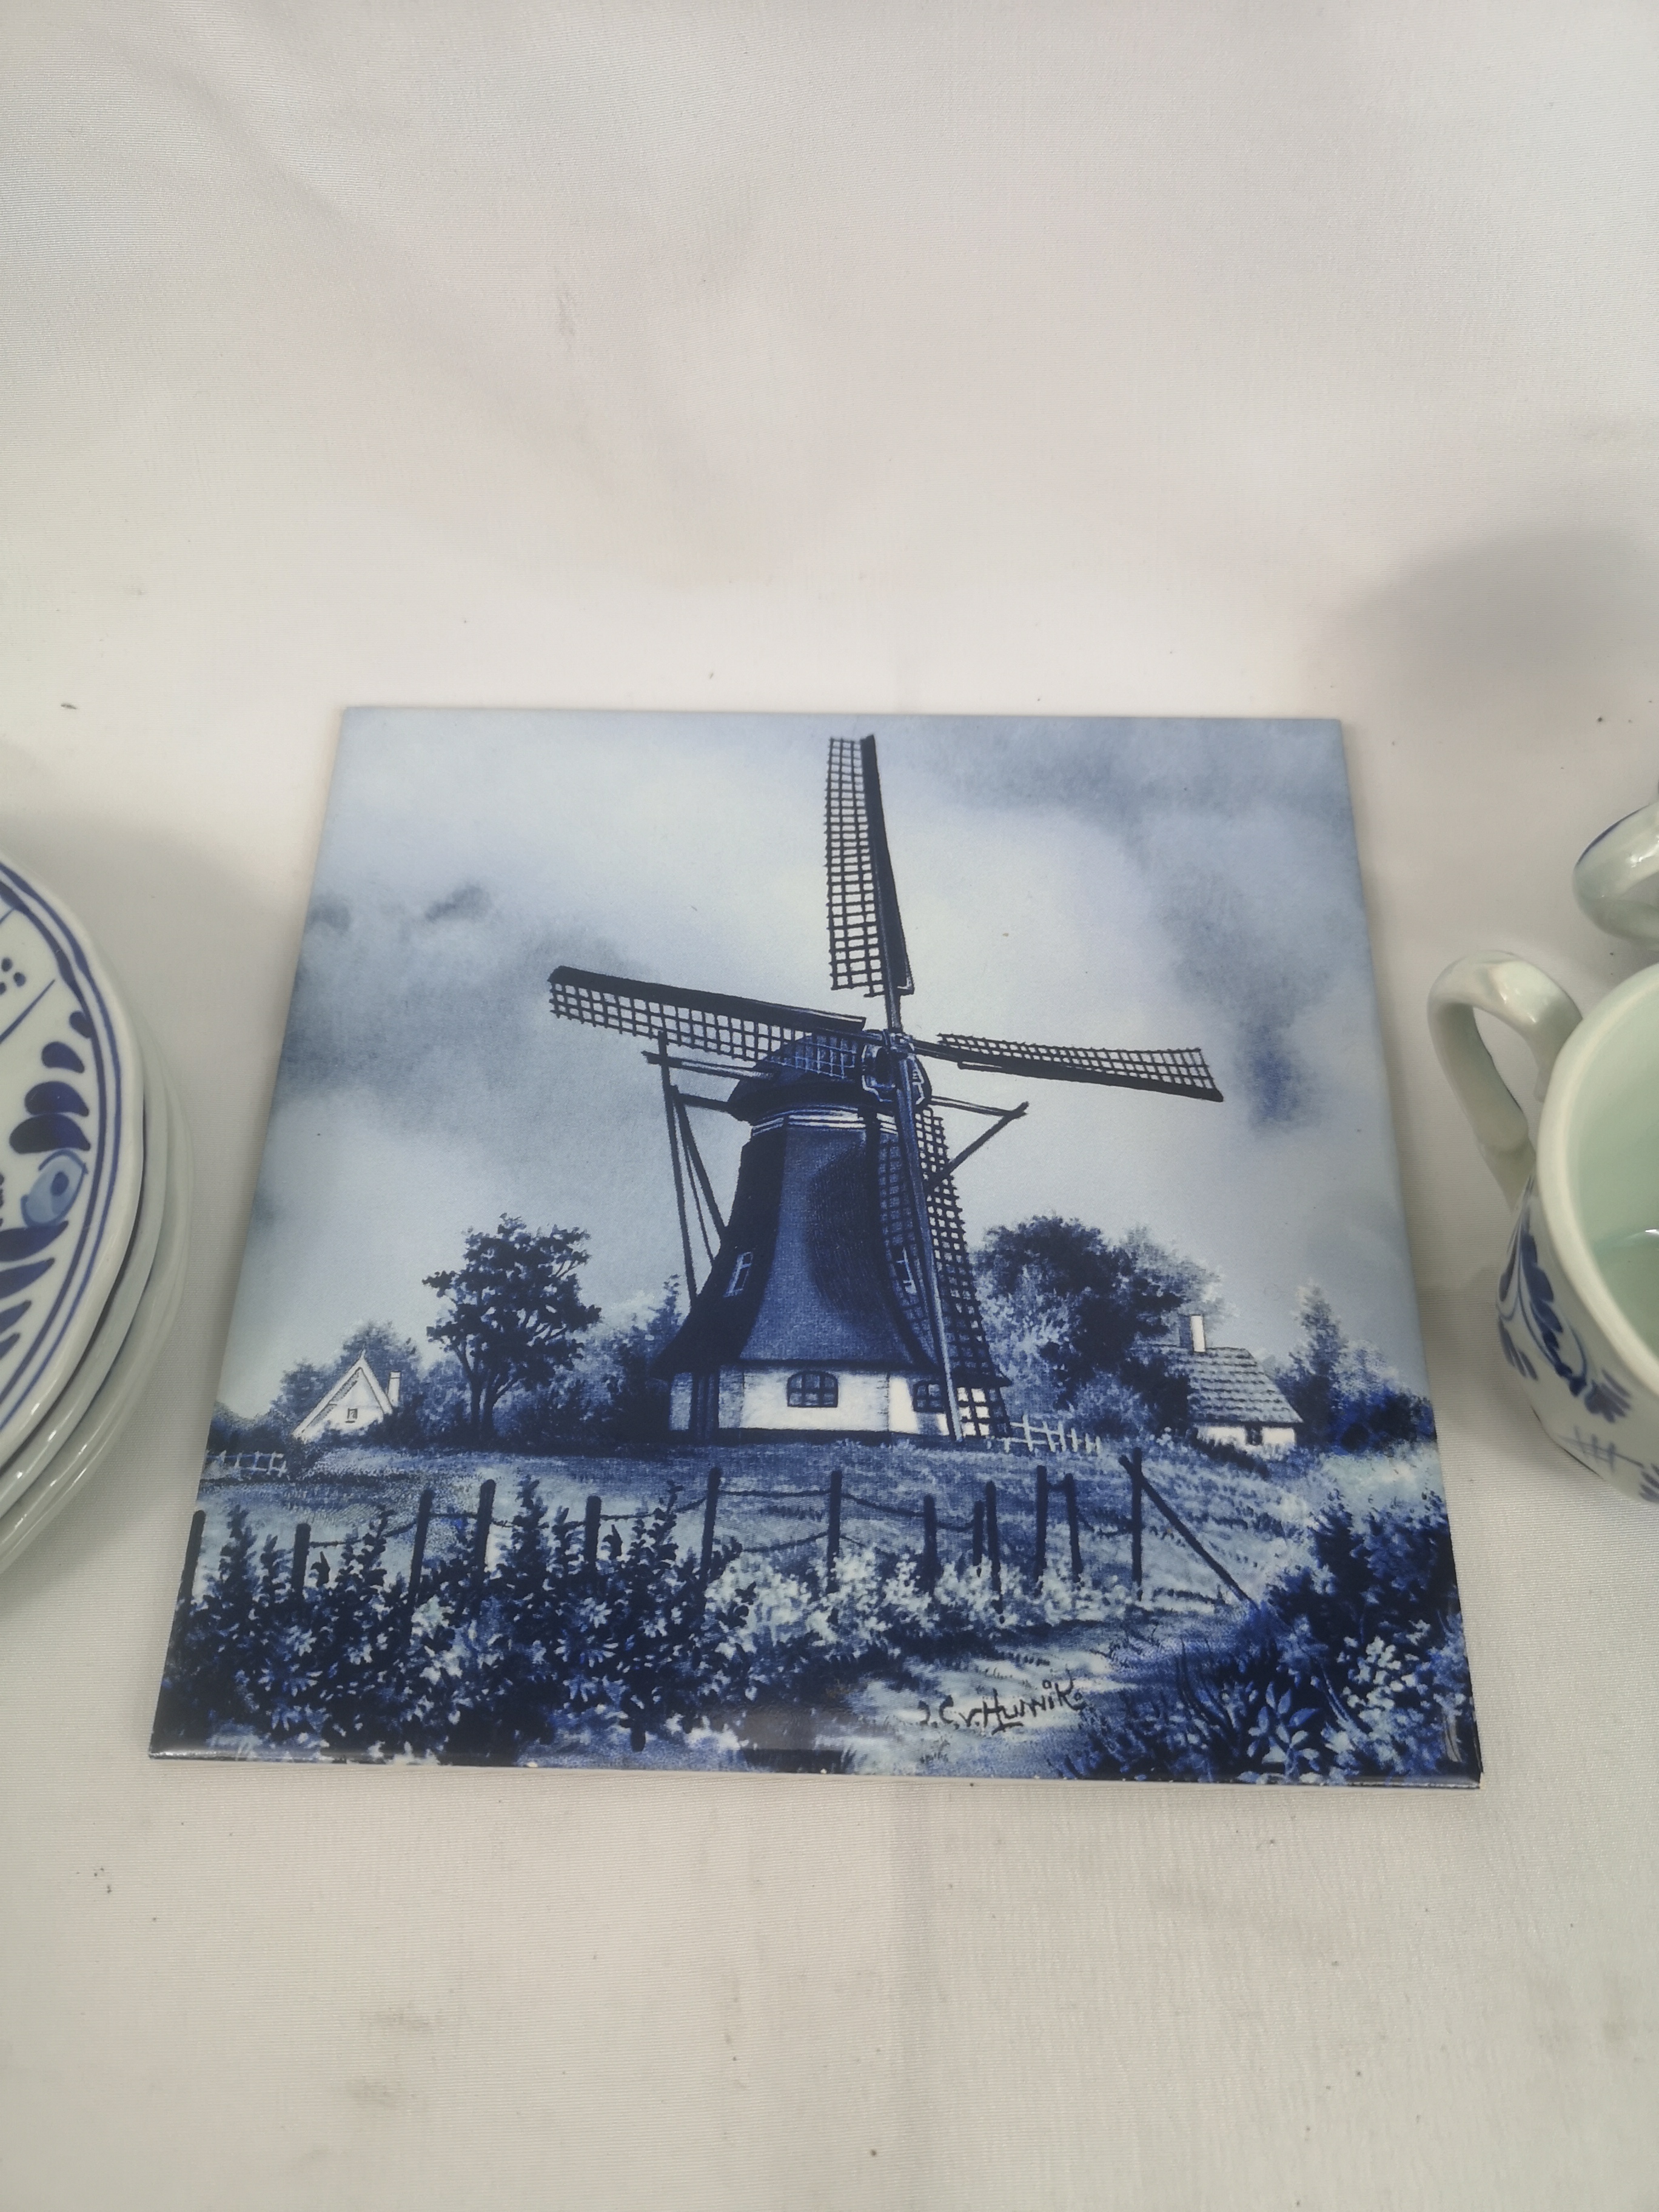 Four Delft cups and saucers together with a Delft tile - Image 4 of 4